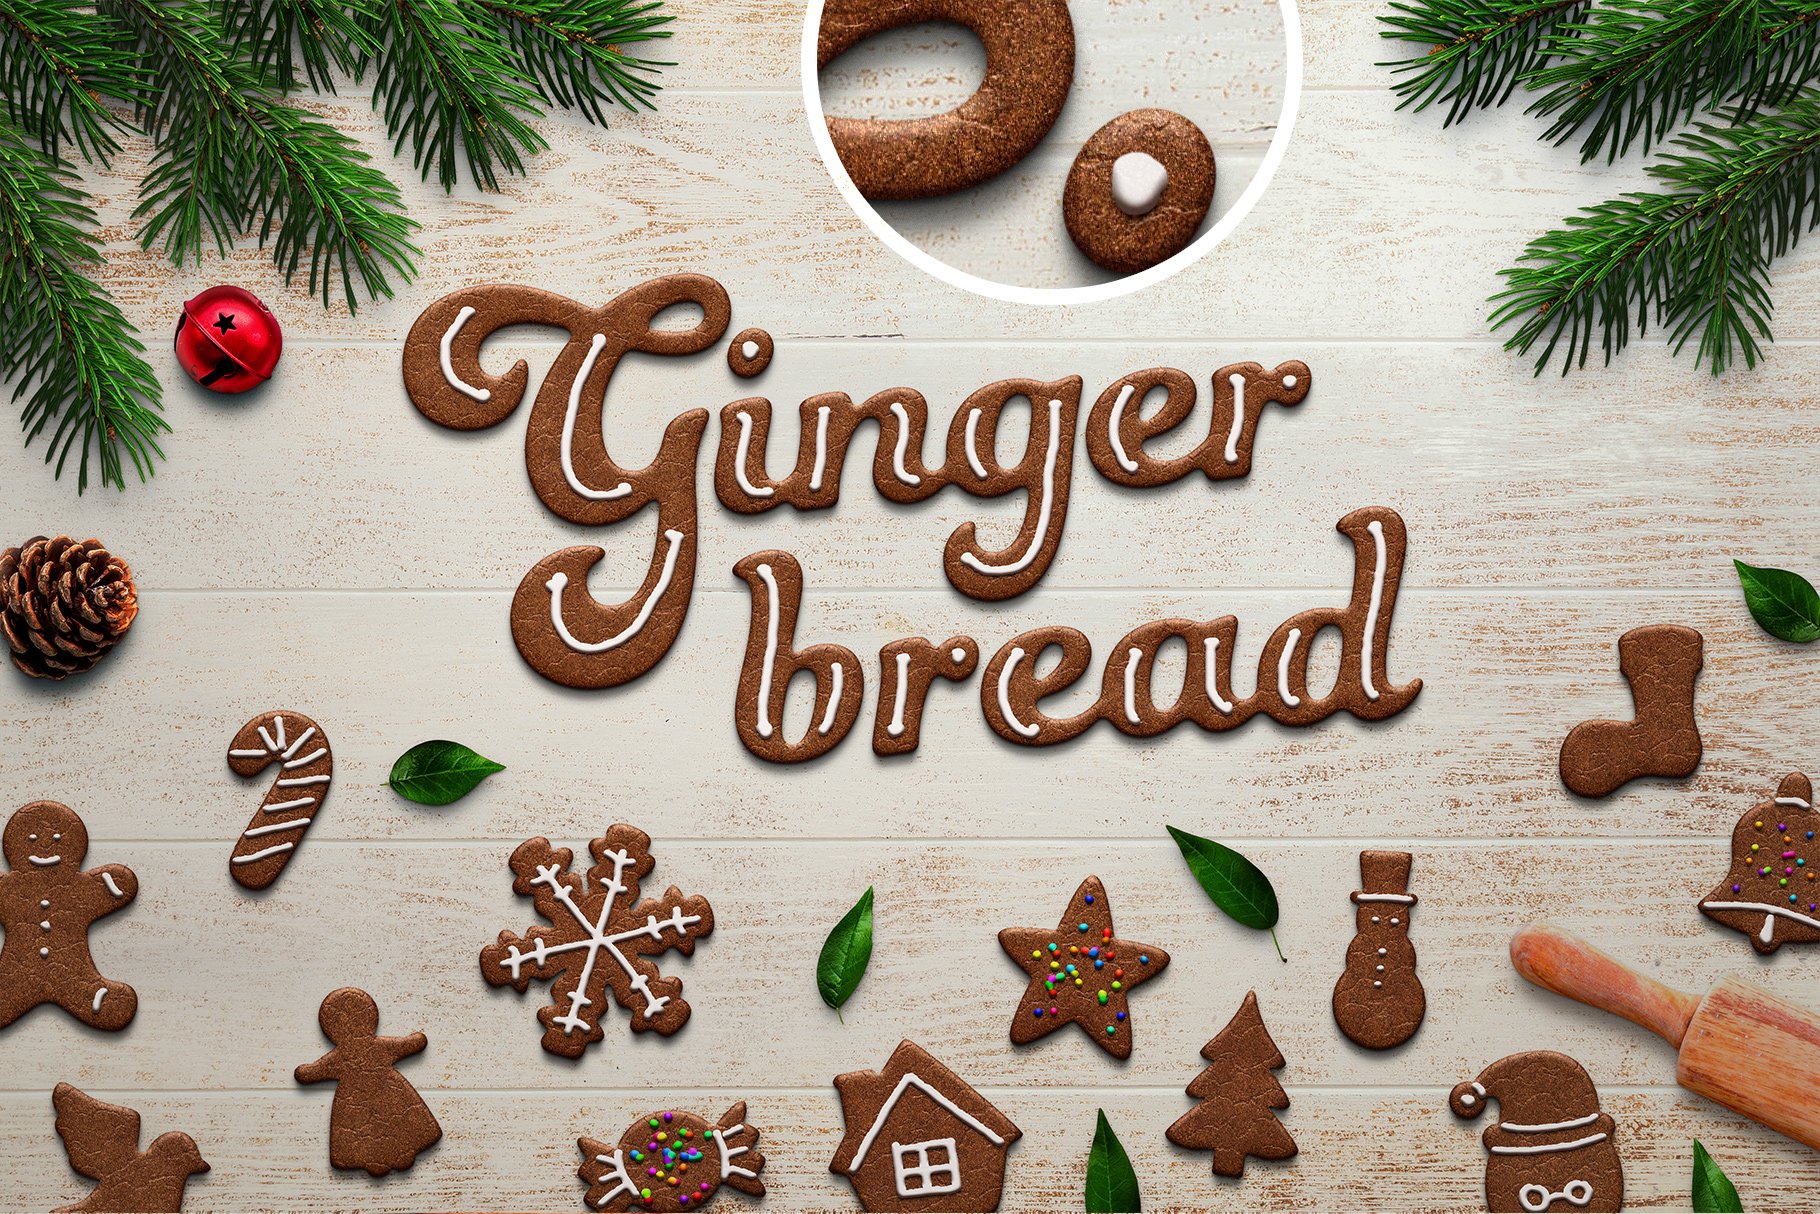 foody cristmas edition food lettering and scene creator gingerbread 860